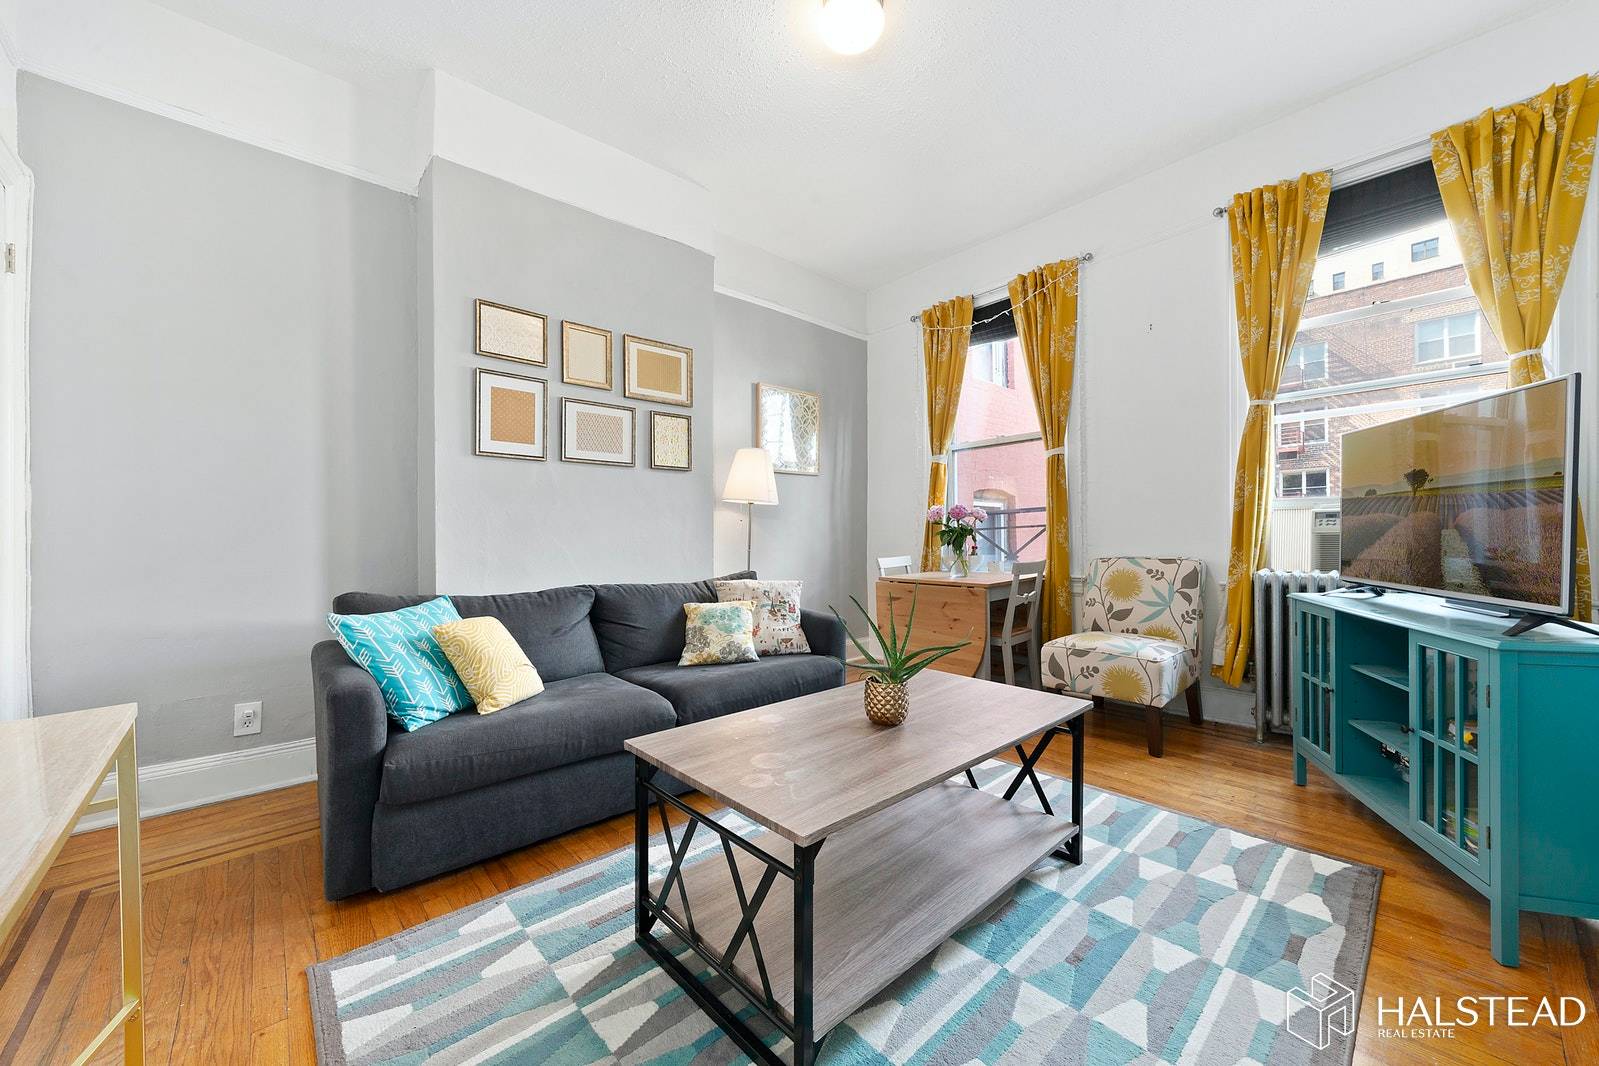 Beautiful Landmark SoHo Townhouse 2 bedroom 1 bath featuring original moldings and details, hi ceilings, walnut wood floors, sunny north and south exposures, a separate eat in kitchen has a ...